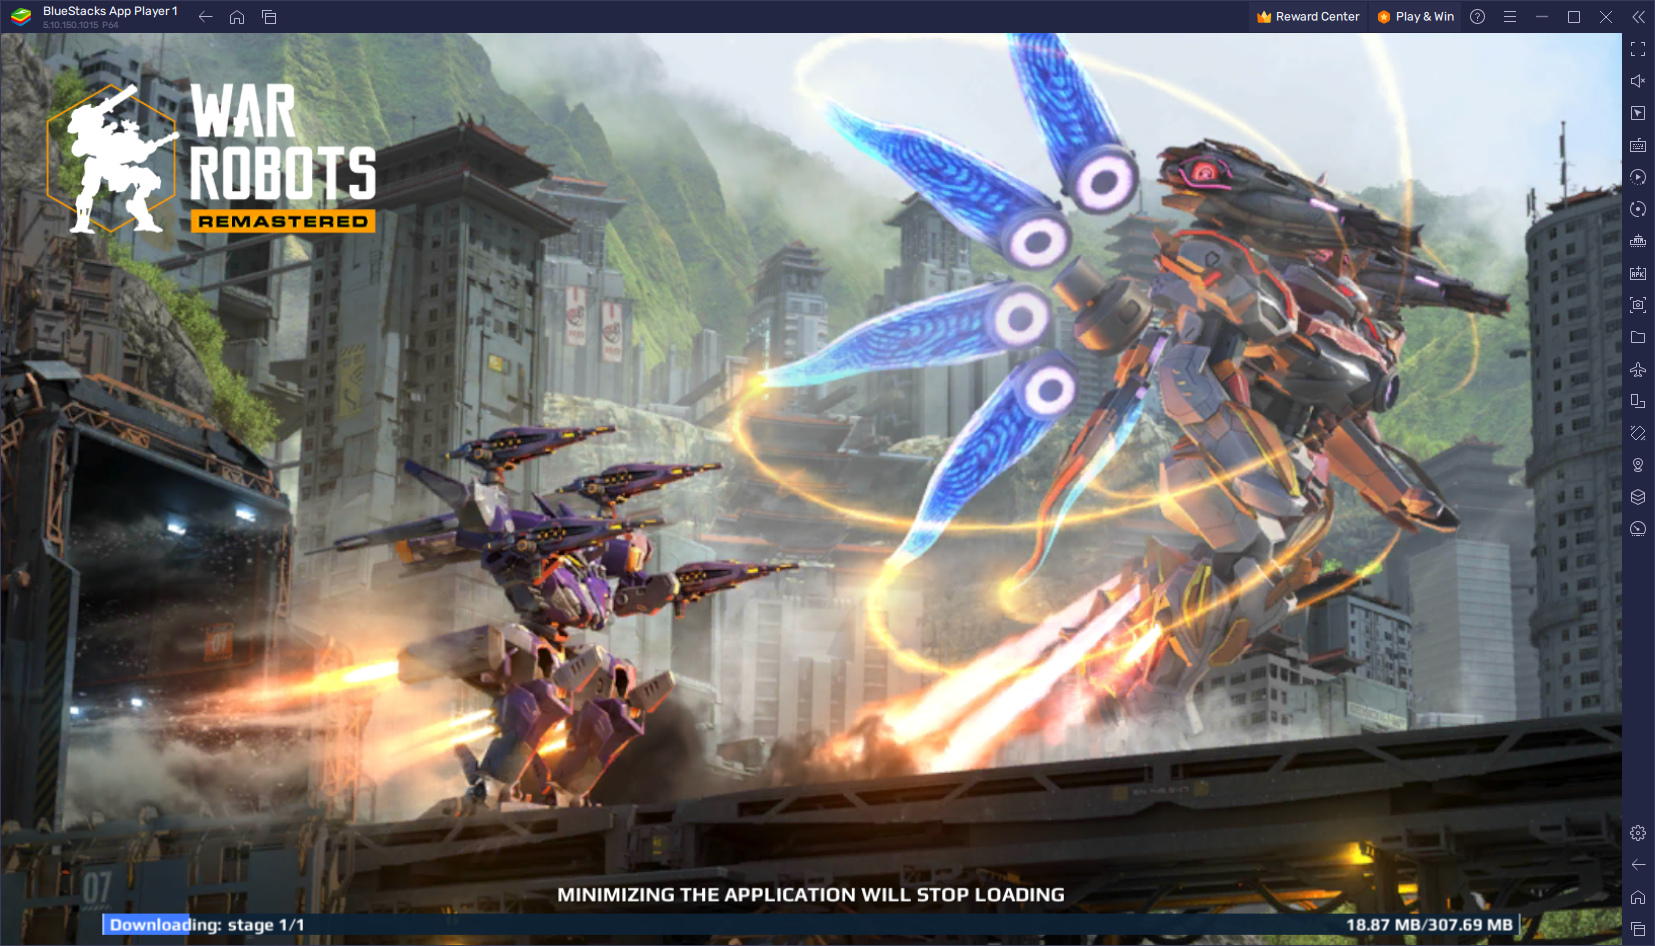 War Robots Now Playable on BlueStacks At Up to a Silky Smooth 240 FPS